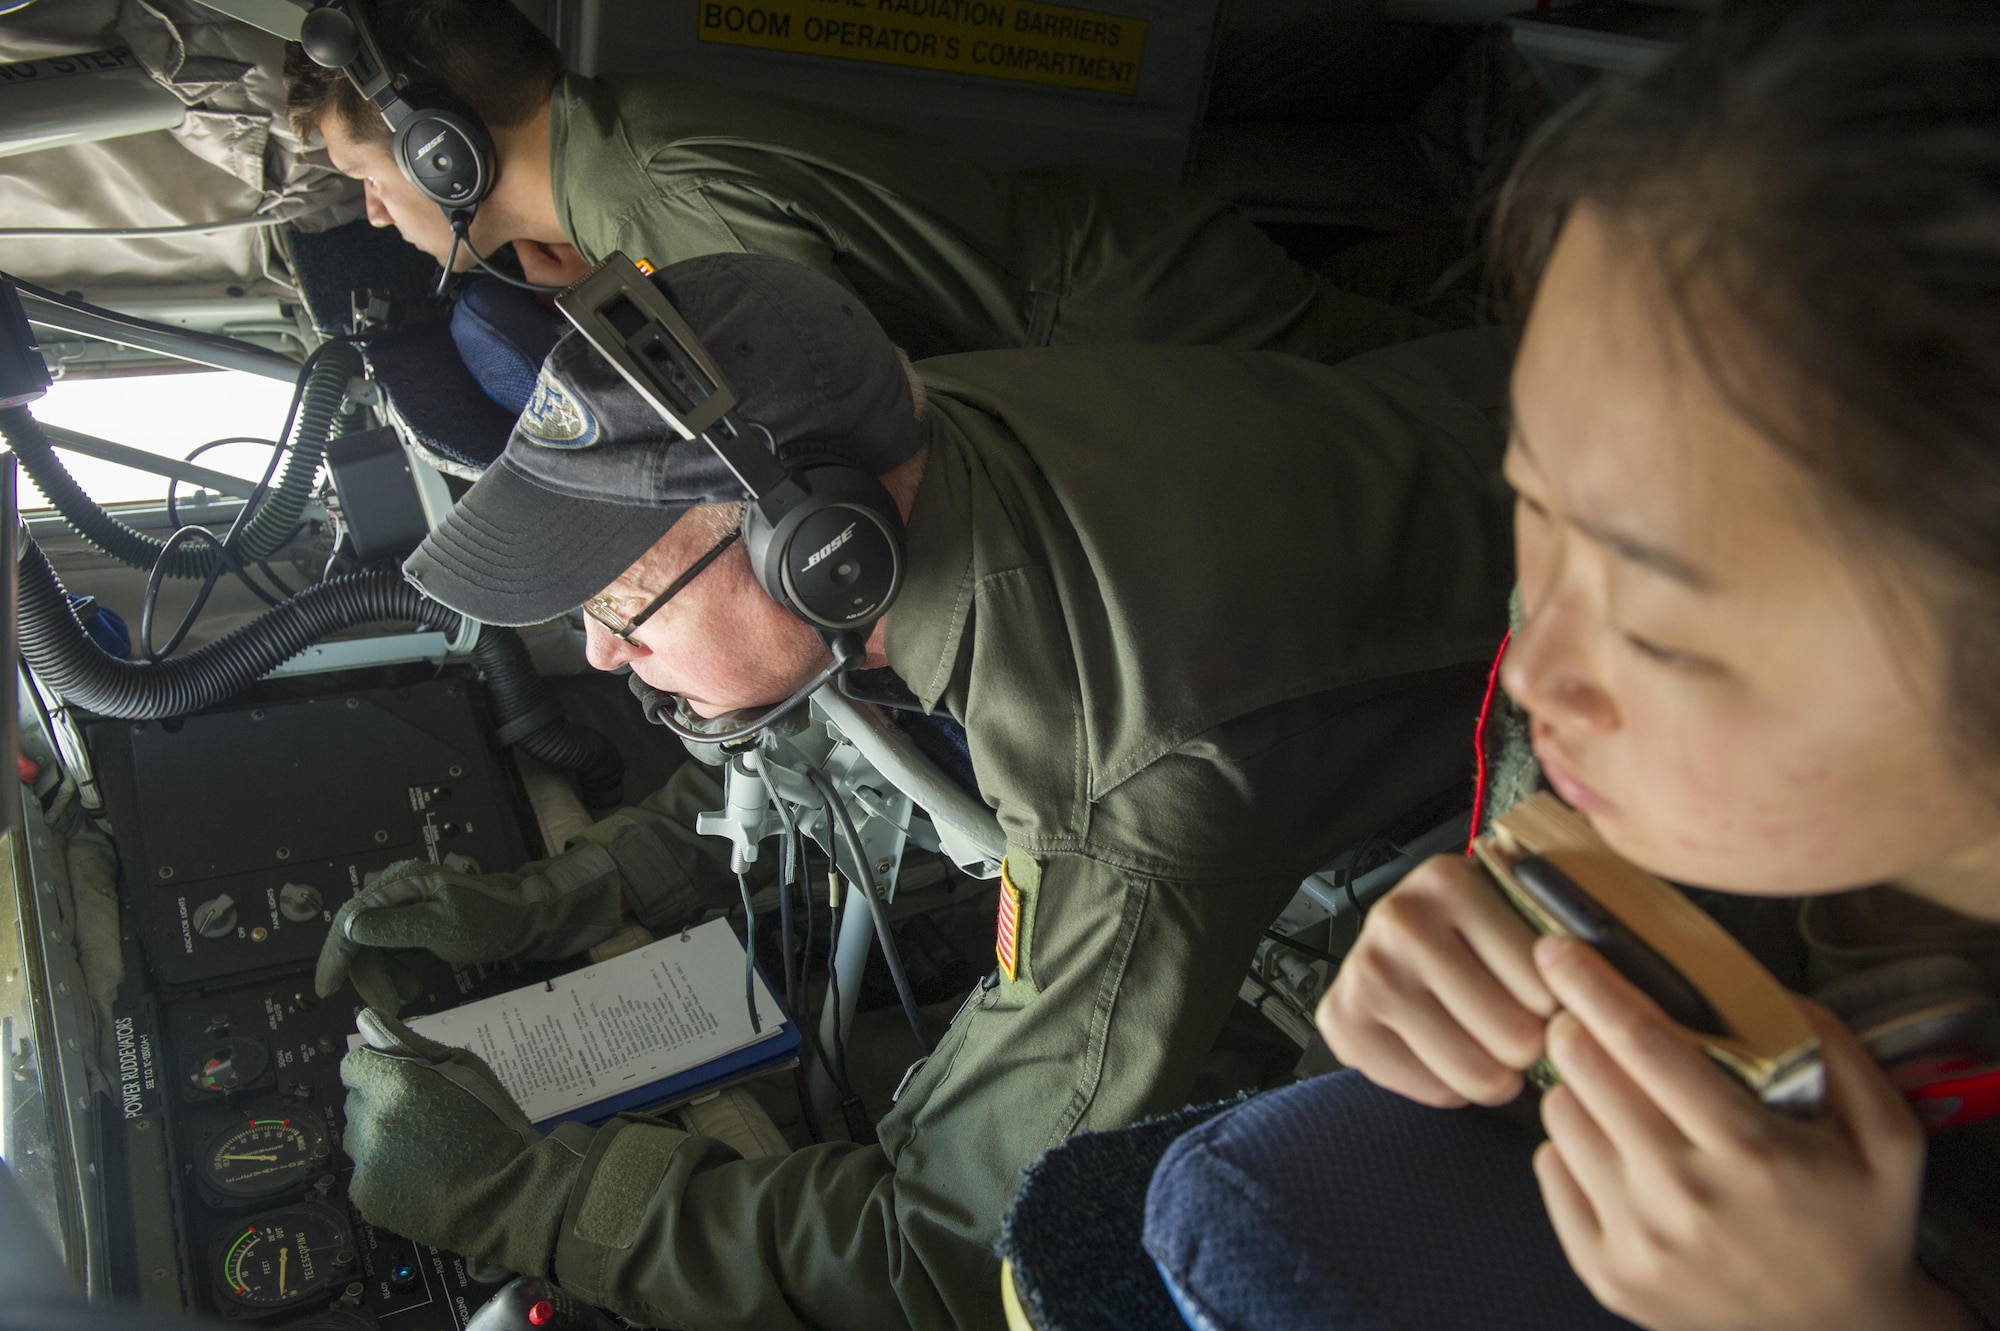 Two cadets from the U.S. Air Force Academy observe Senior Master Sgt. Jim Martin, 314th Air Refueling Squadron boom operator, as he prepares for a refueling trainer mission June 9, 2017. Cadets were given an incentive flight to learn more about the operational Air Force as part of their Ops Air Force tour. (U.S. Air Force photo by Senior Airman Tara R. Abrahams)